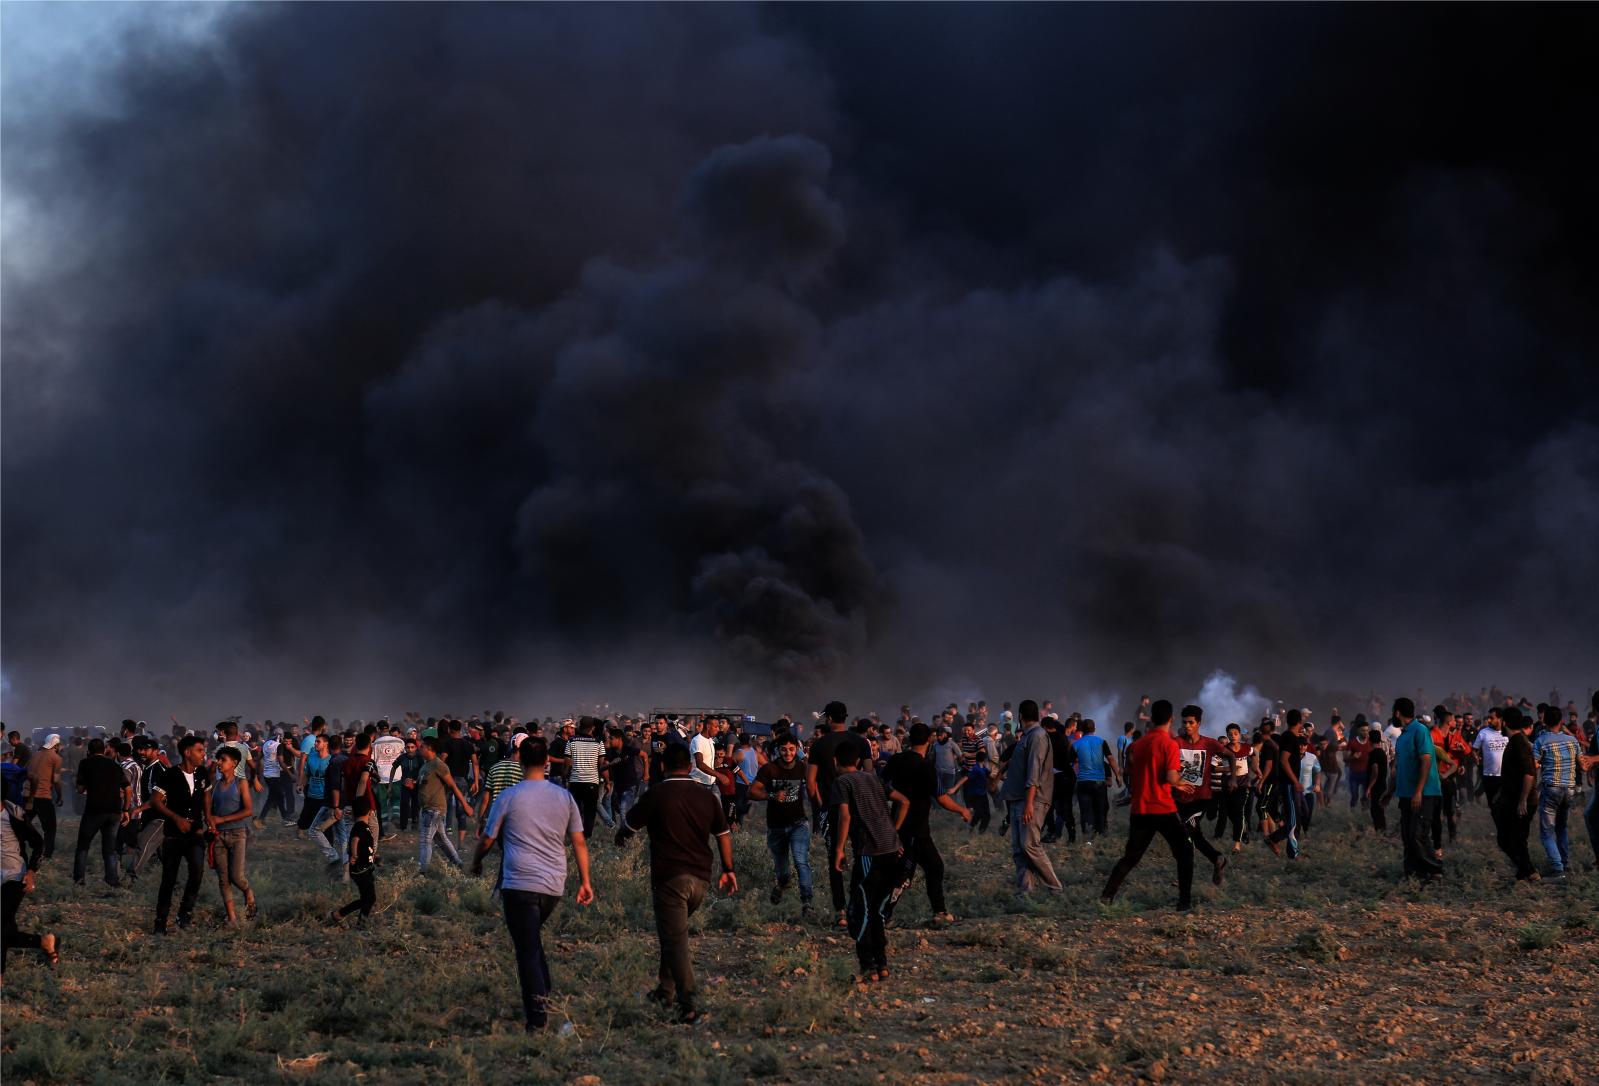 Demonstrators on the Gaza border burn tires during clashes with the Israeli army. 10 Dec 2018